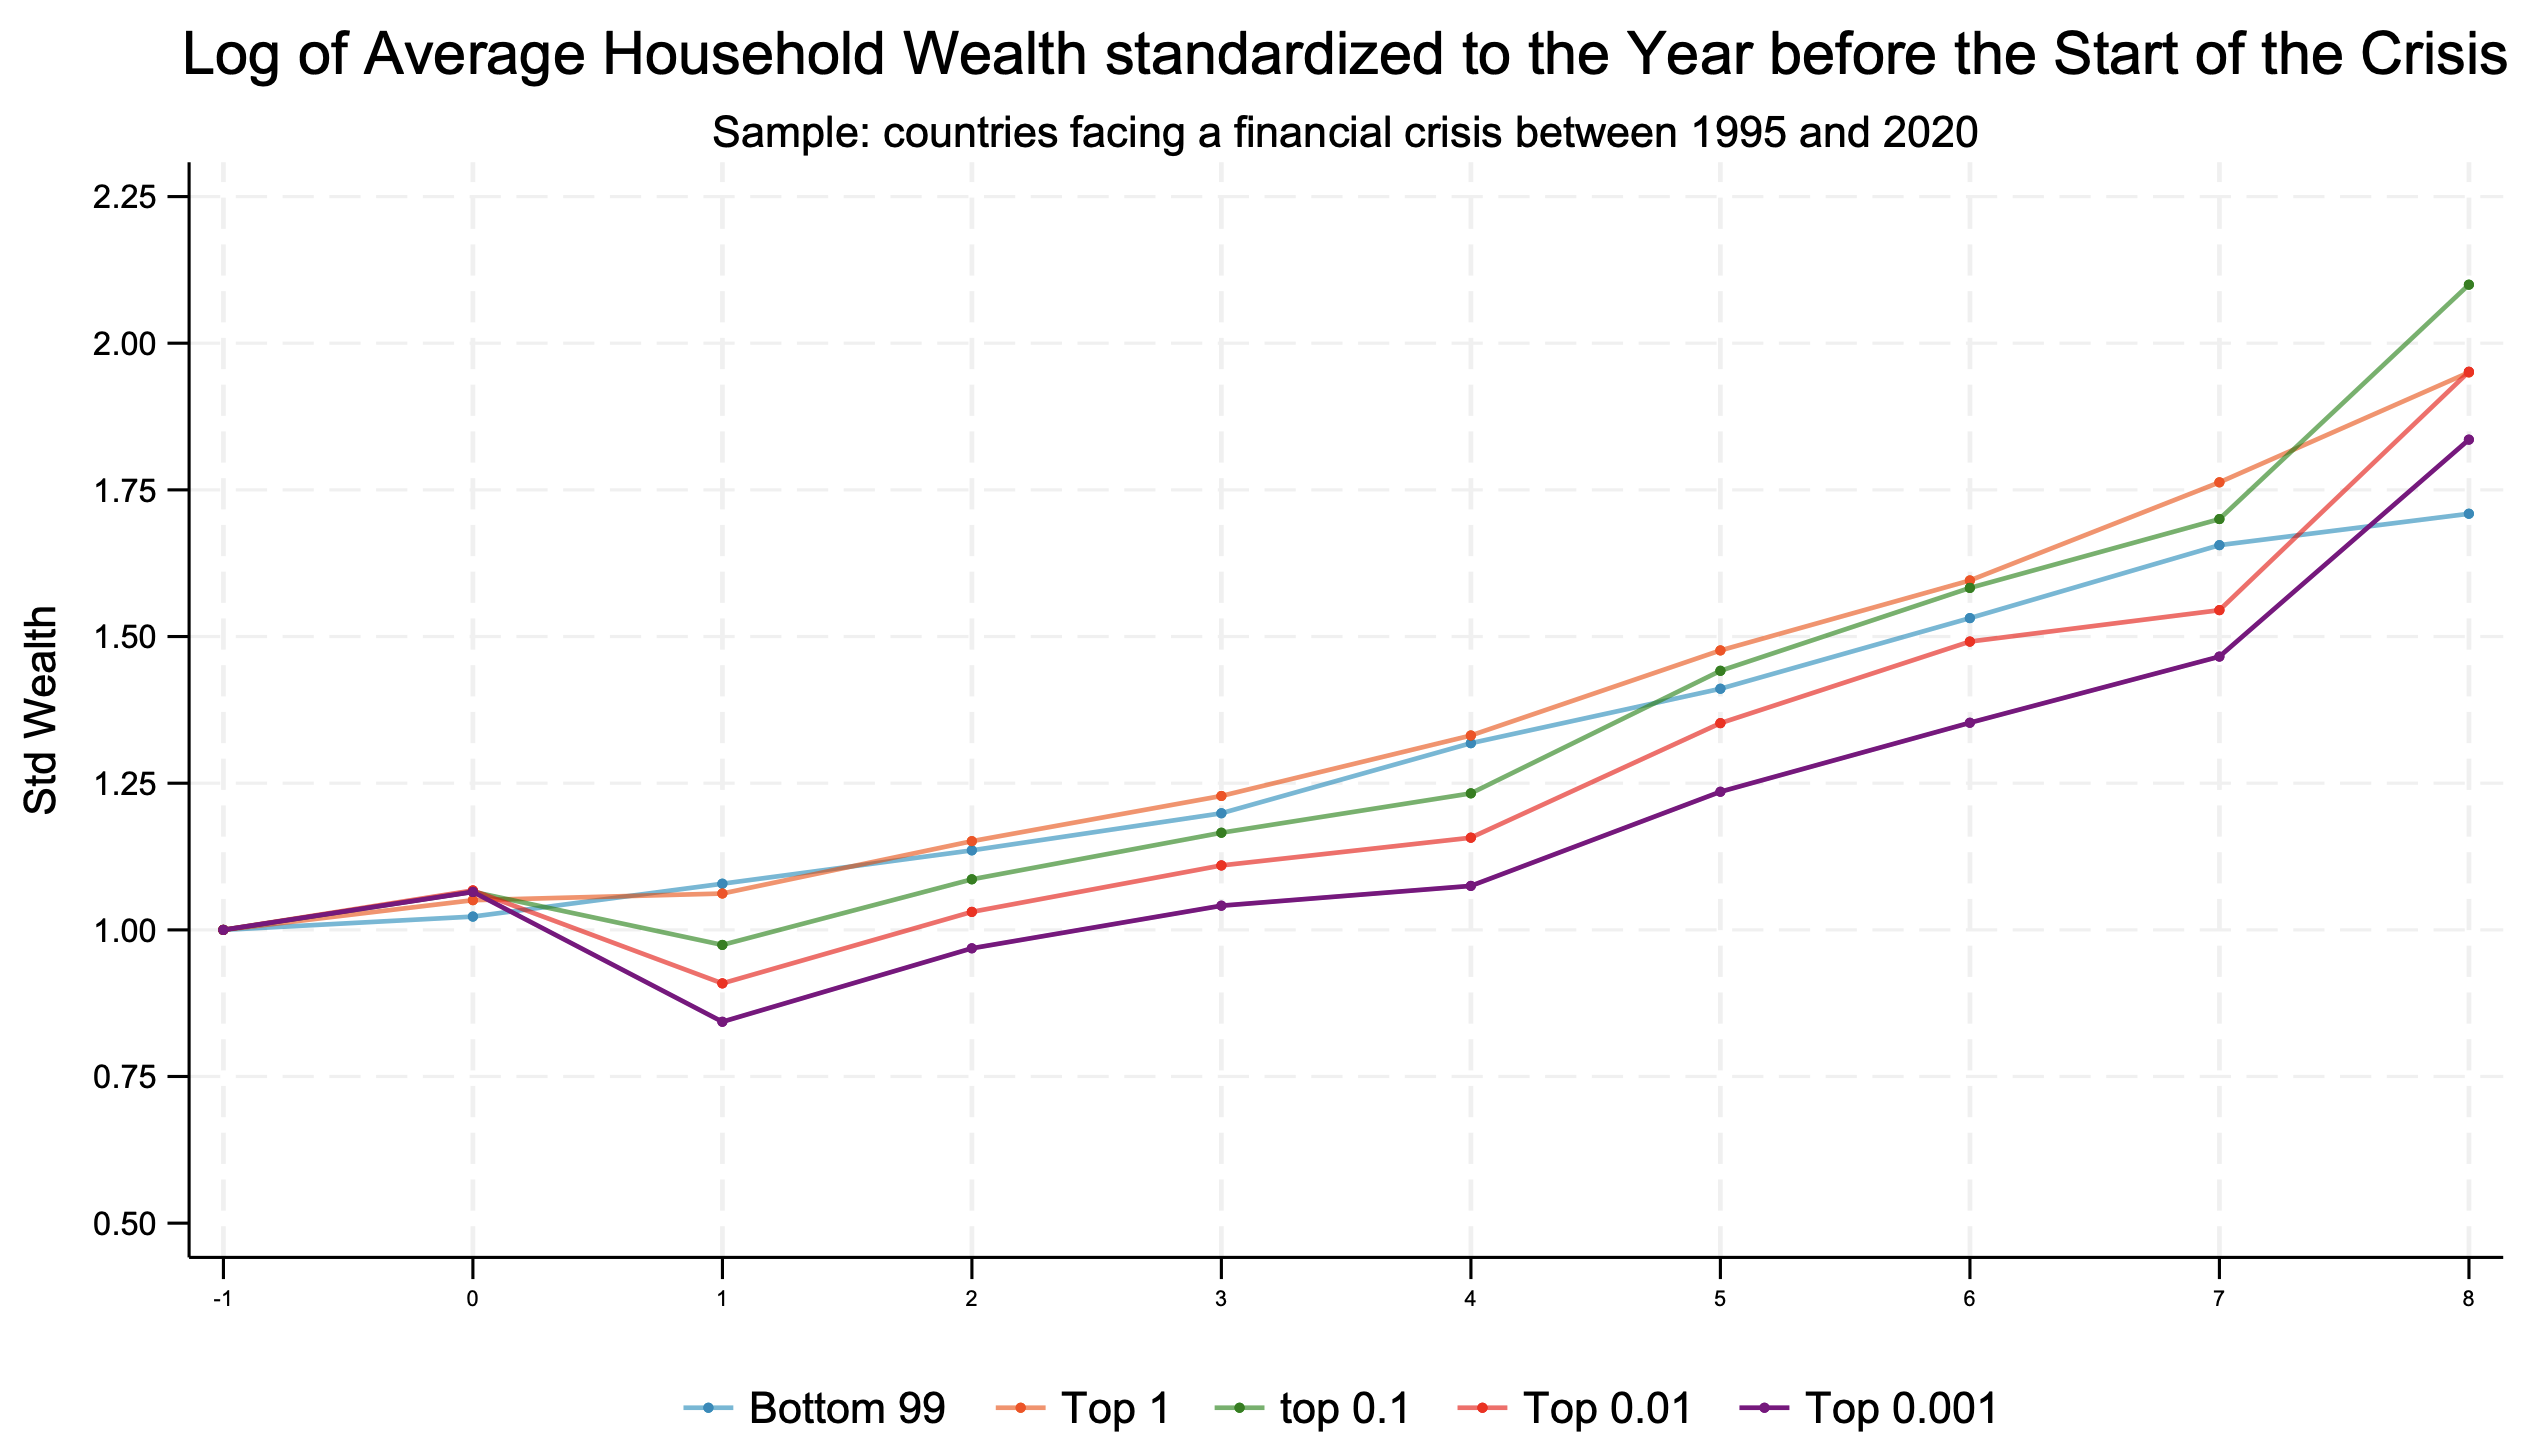 Figure 3 Dynamic of average wealth by income quantiles after the start of a financial crisis